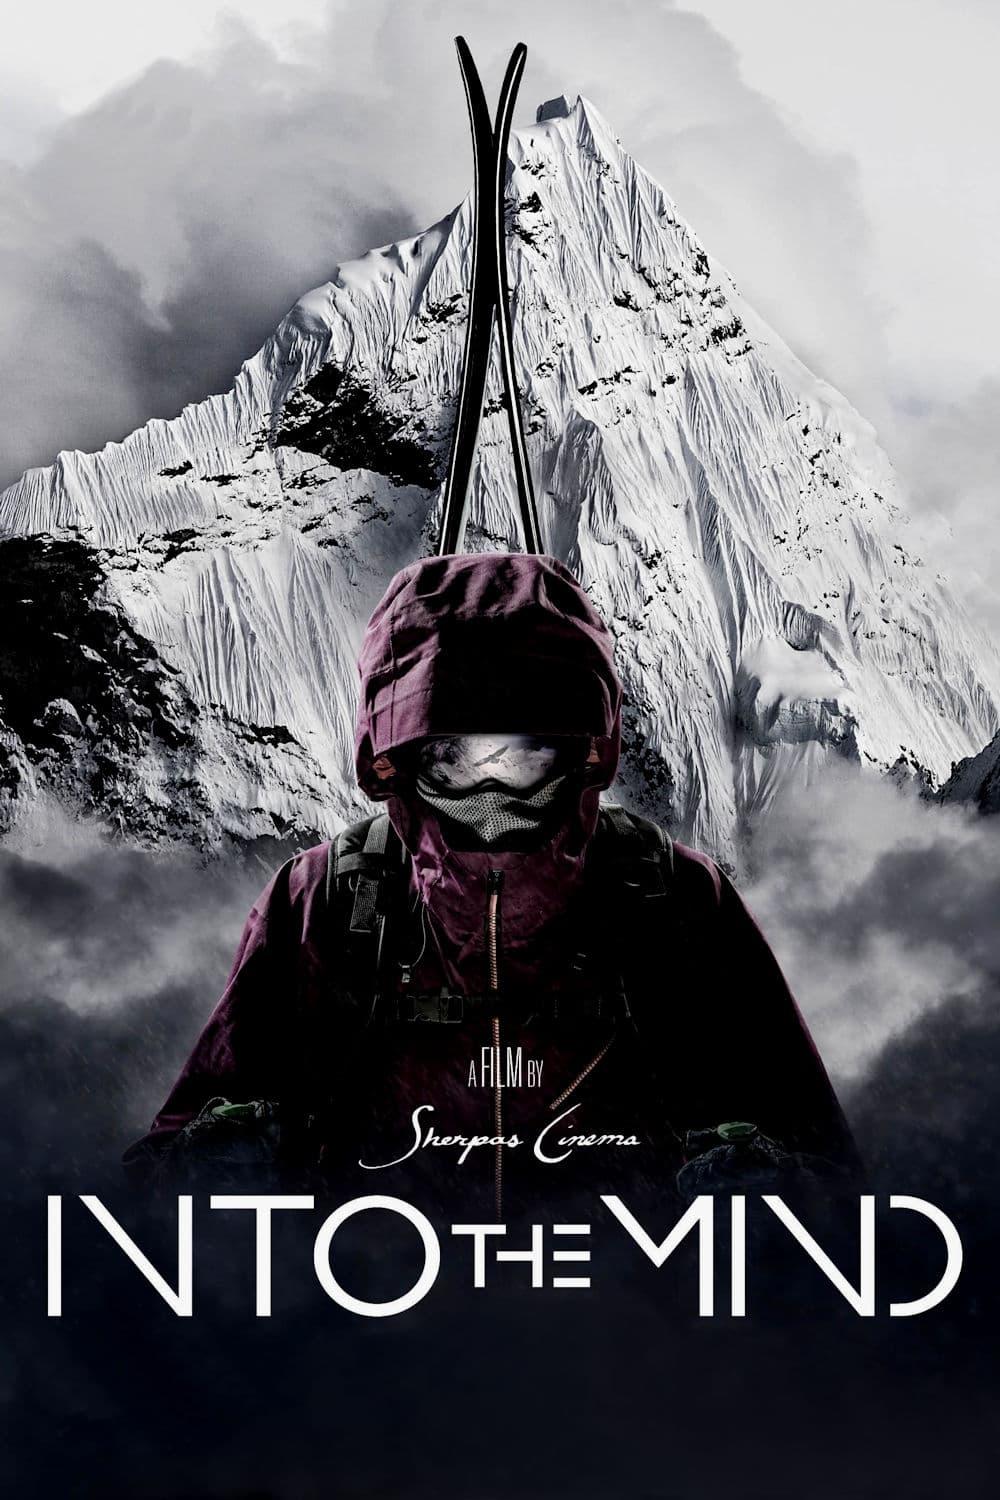 Into the Mind poster